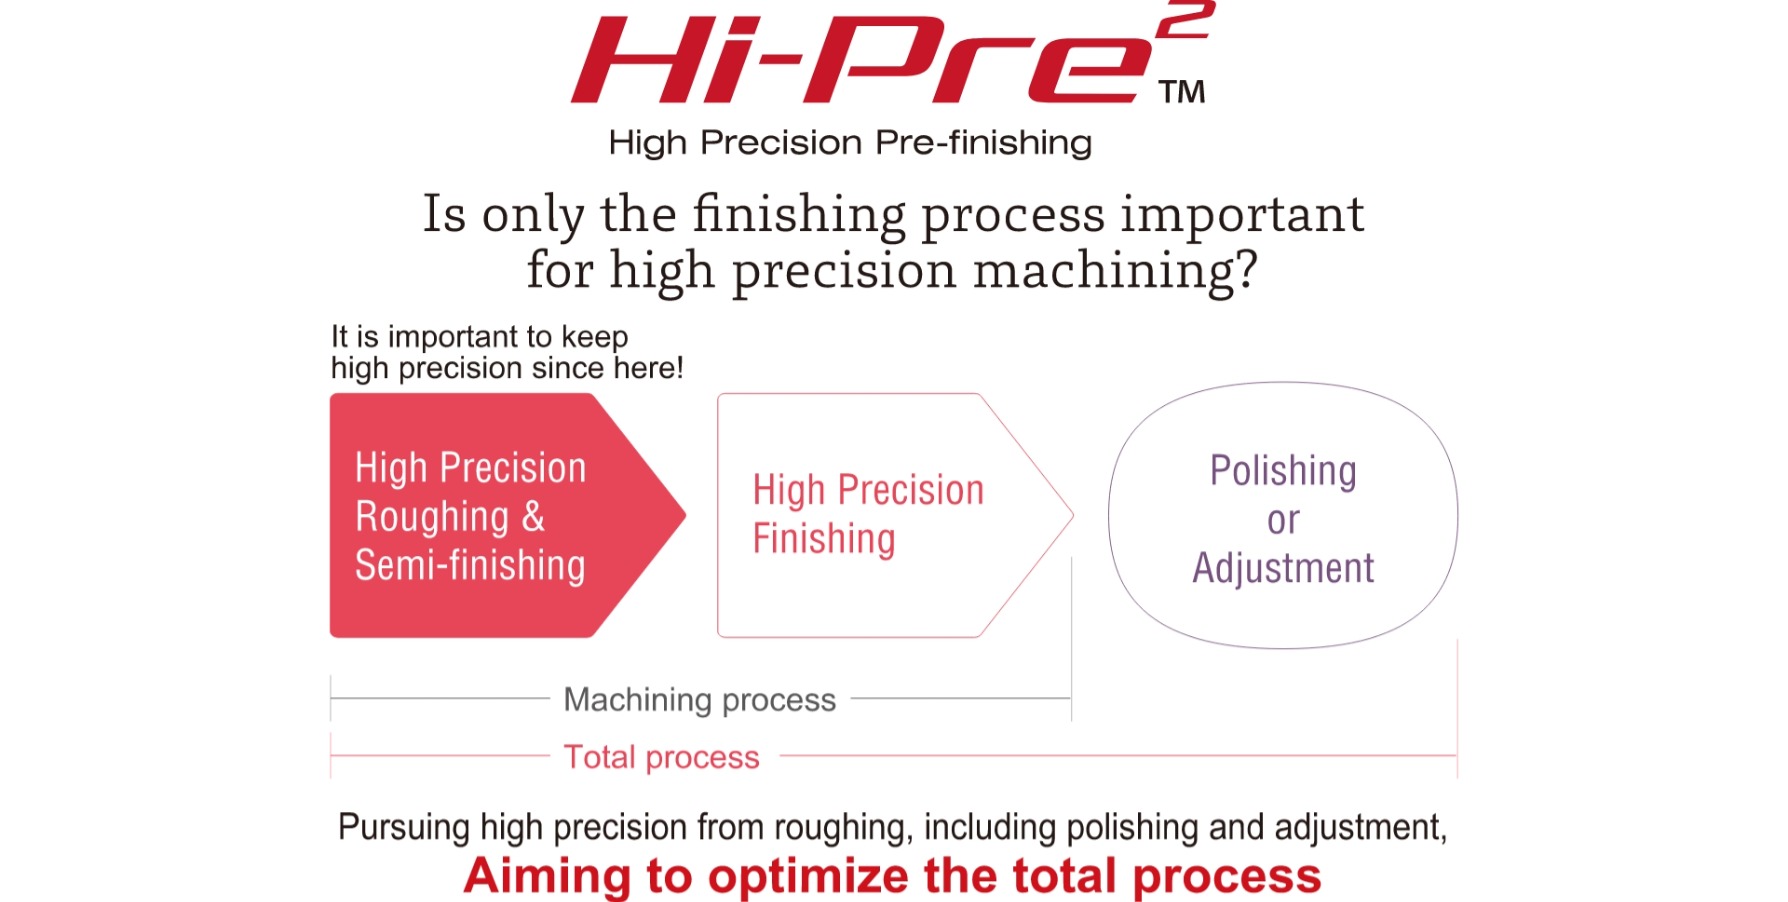 Pursuing high precision from rough machining, aiming to optimize the total process including polishing and adjustment